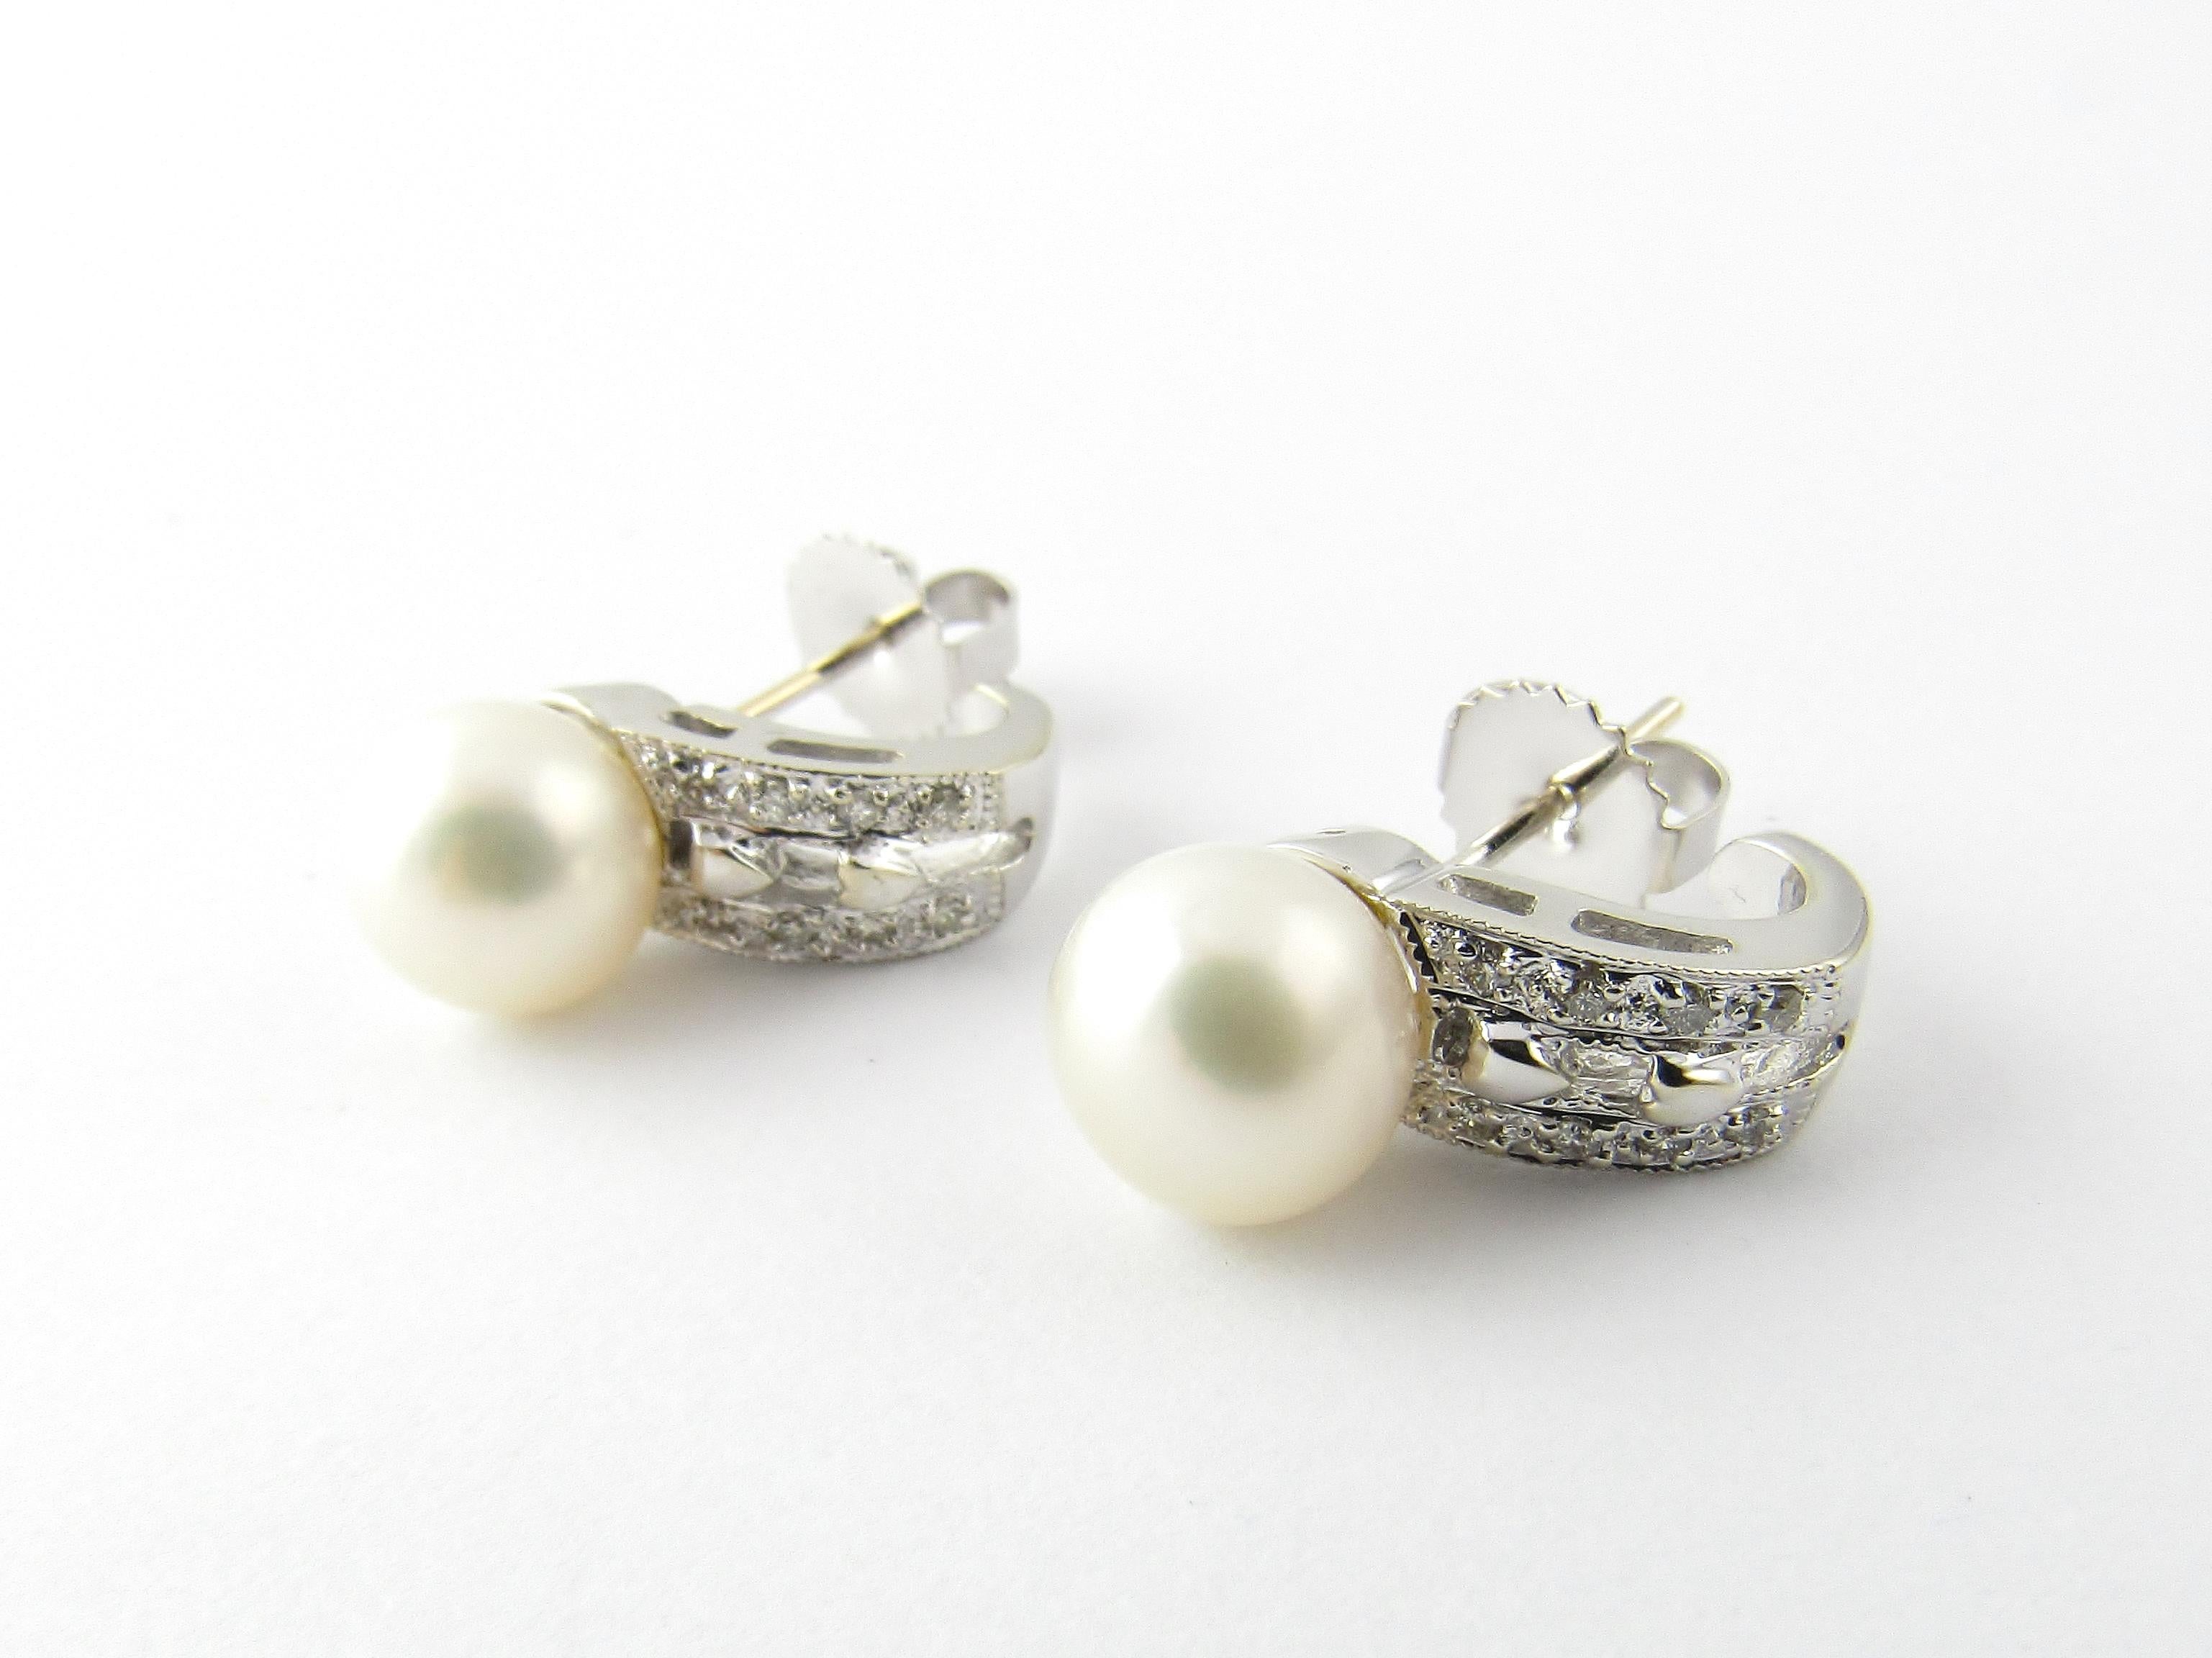 14 Karat White Gold Pearl and Diamond Earrings-

These elegant earrings each feature one white pearl (9 mm) accented with eight round brilliant cut diamonds and set in classic 14K white gold.  Push back closures.

Approximate total diamond weight: 